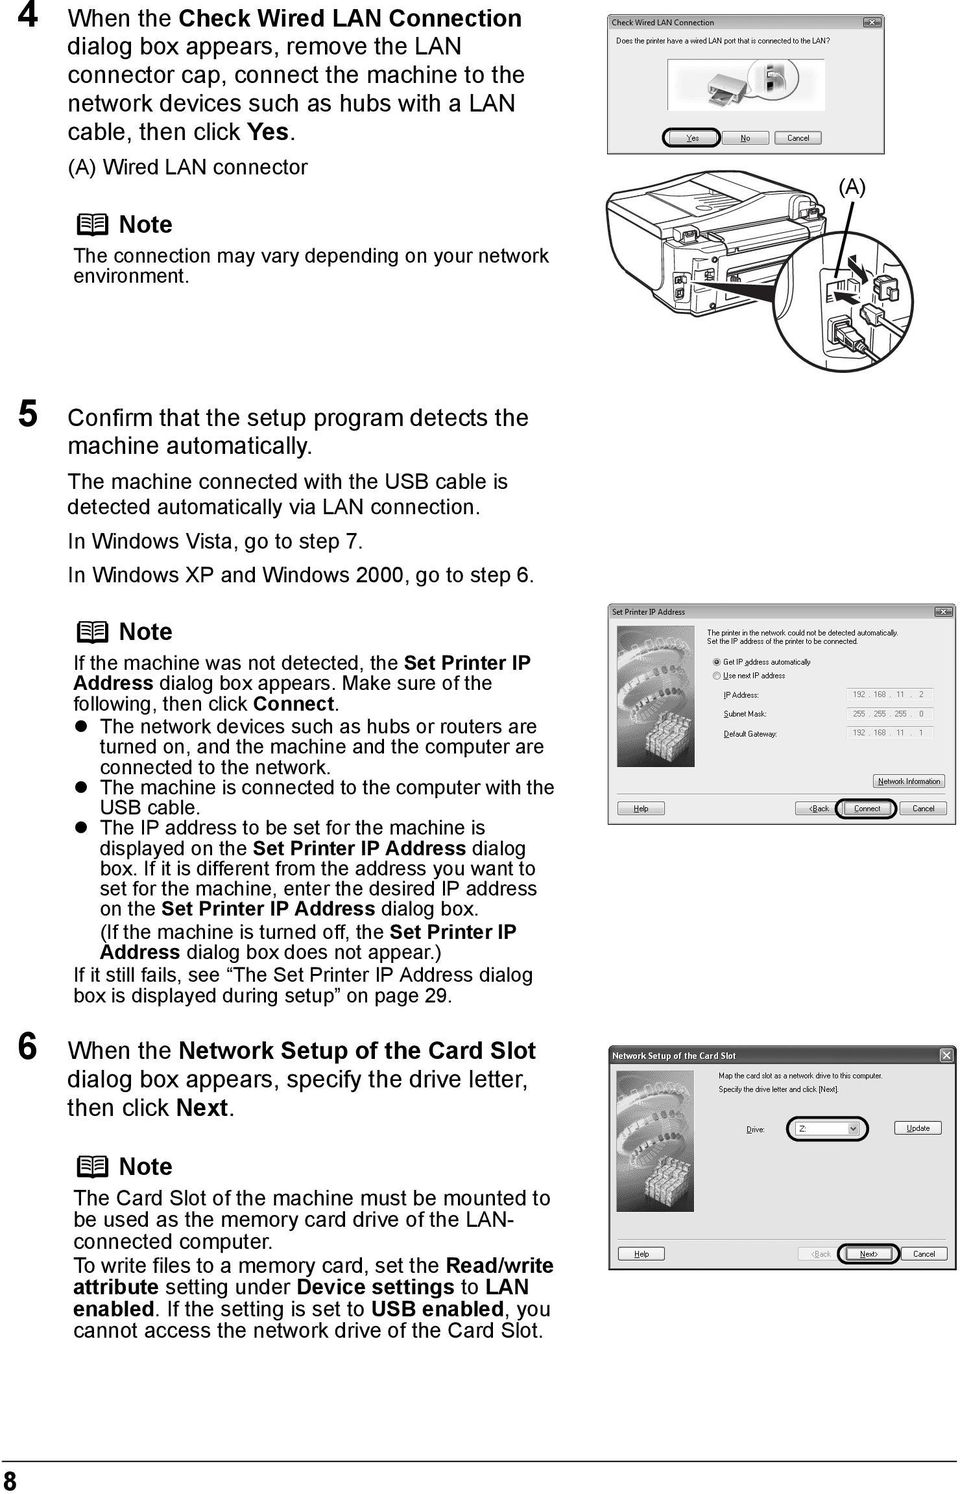 The machine connected with the USB cable is detected automatically via LAN connection. In Windows Vista, go to step 7. In Windows XP and Windows 2000, go to step 6.